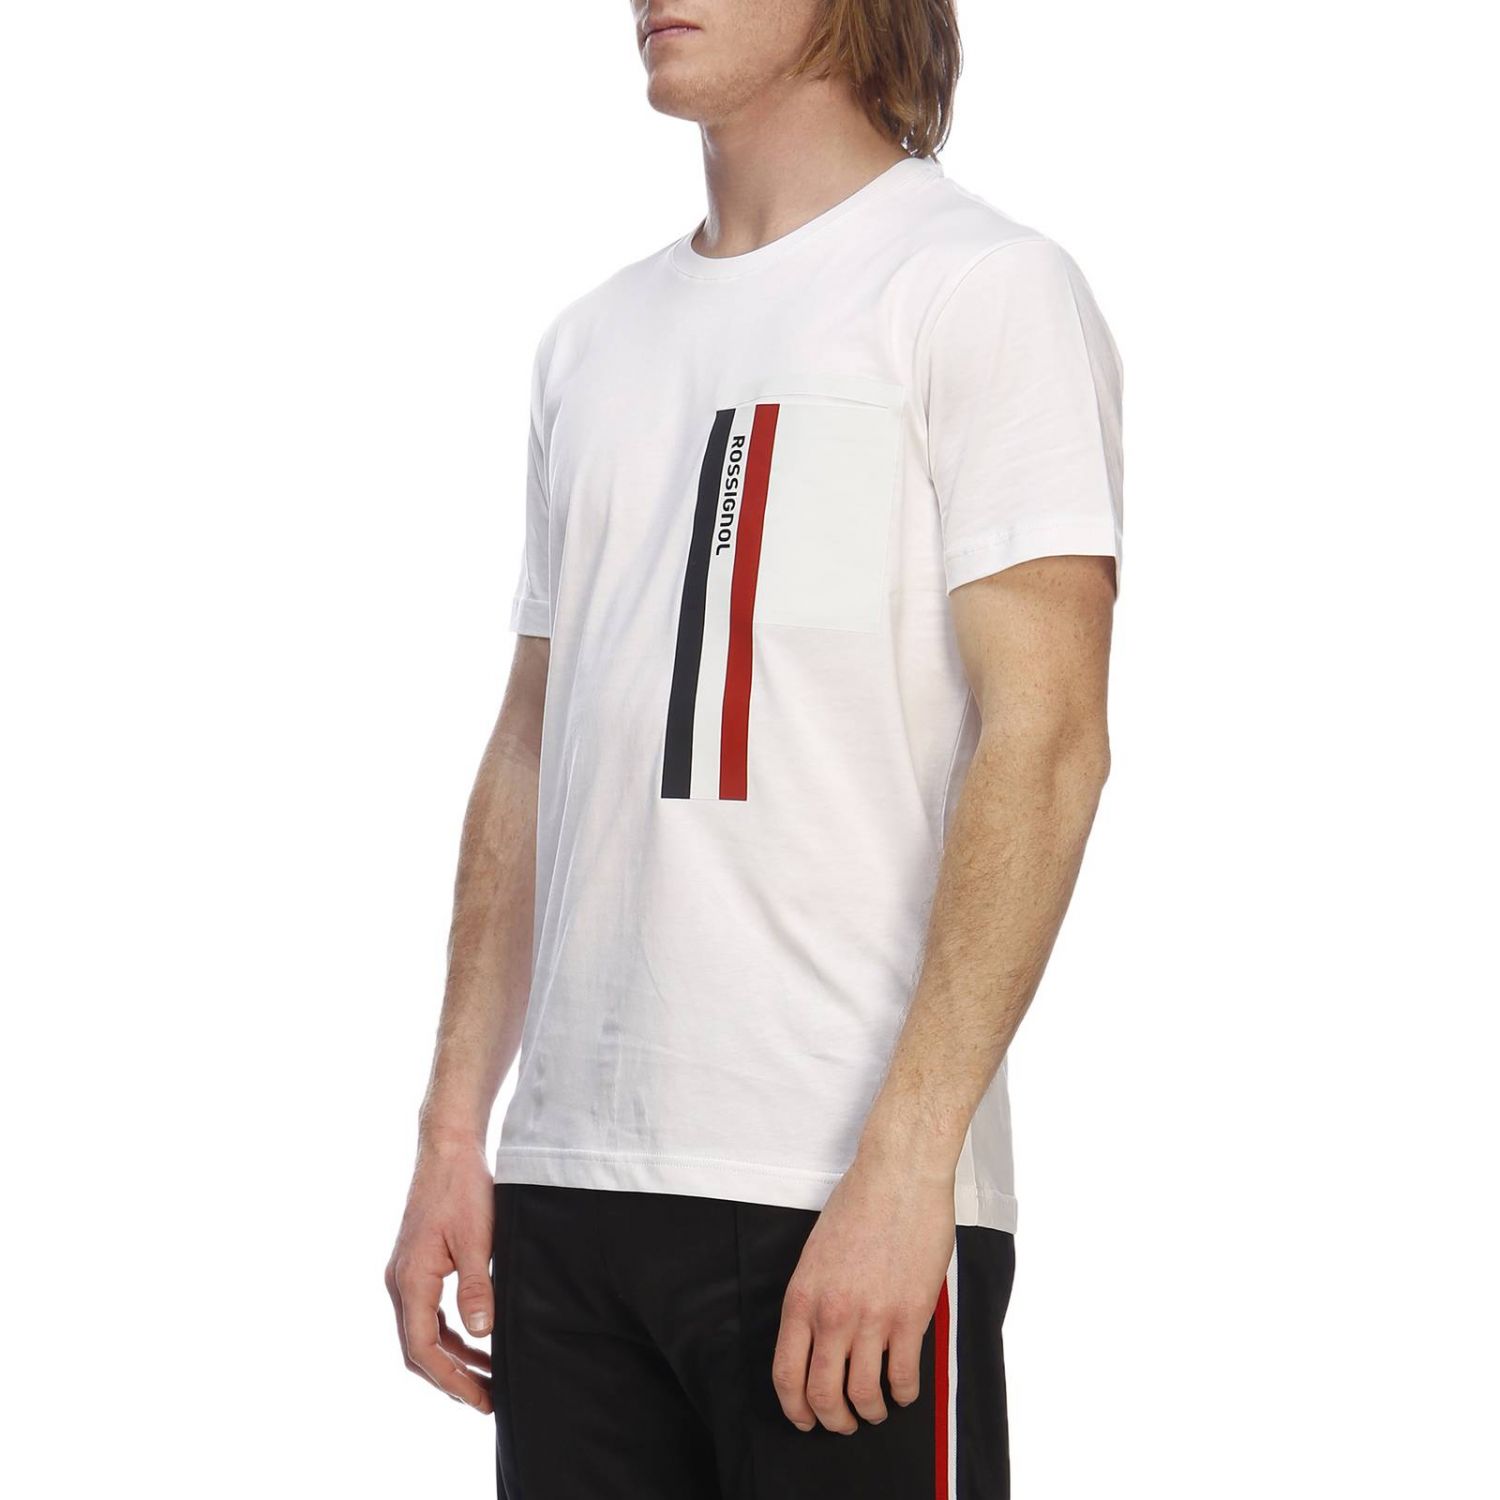 Rossignol Outlet: t-shirt for men - White | Rossignol t-shirt RLHMY27 ...